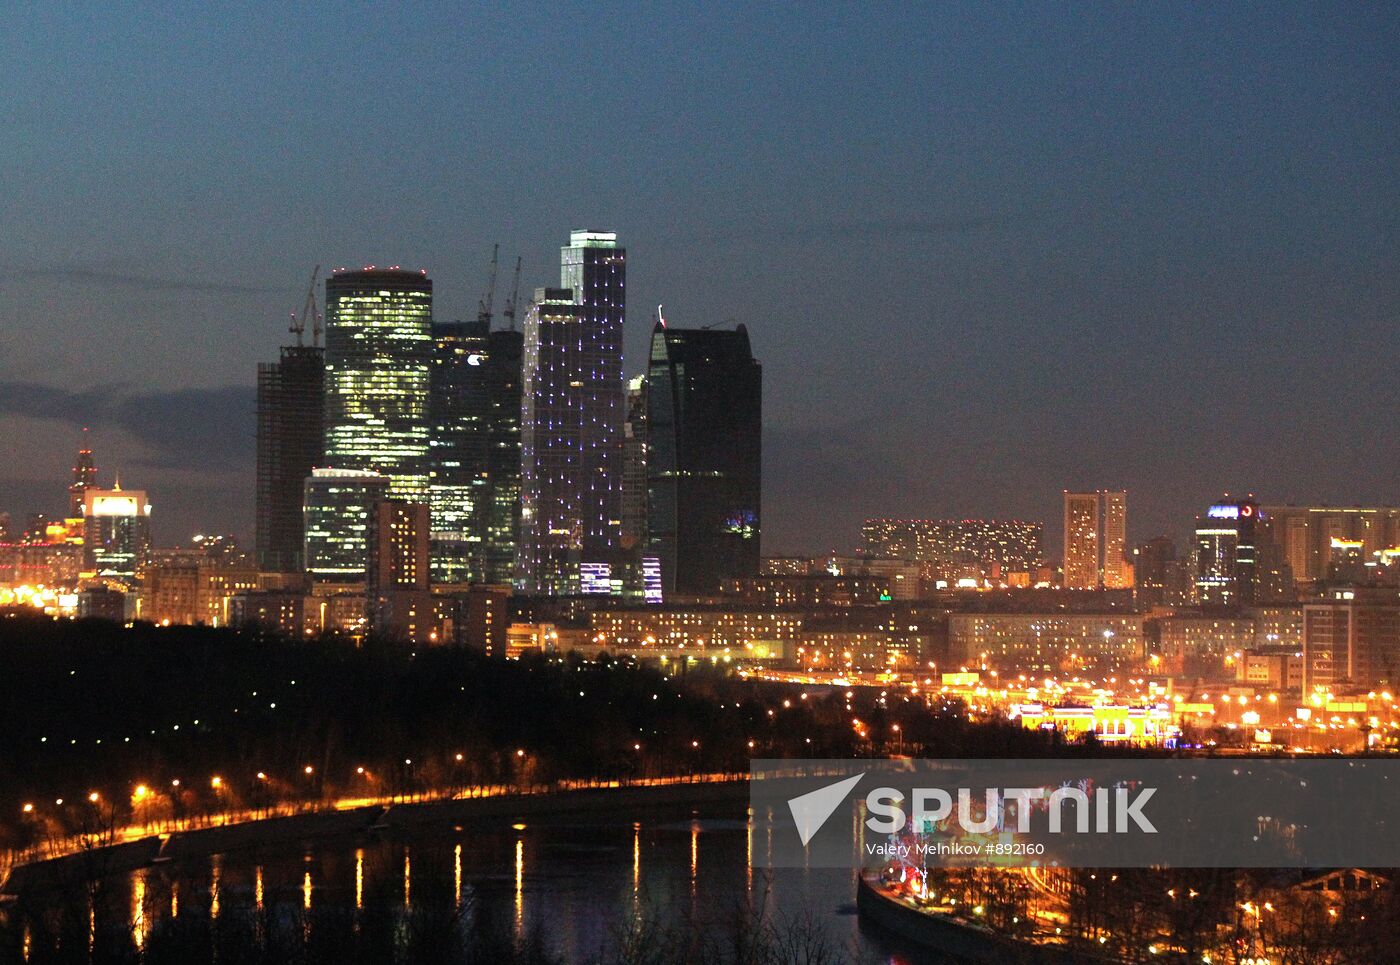 View of Moscow international business center "Moscow-City"